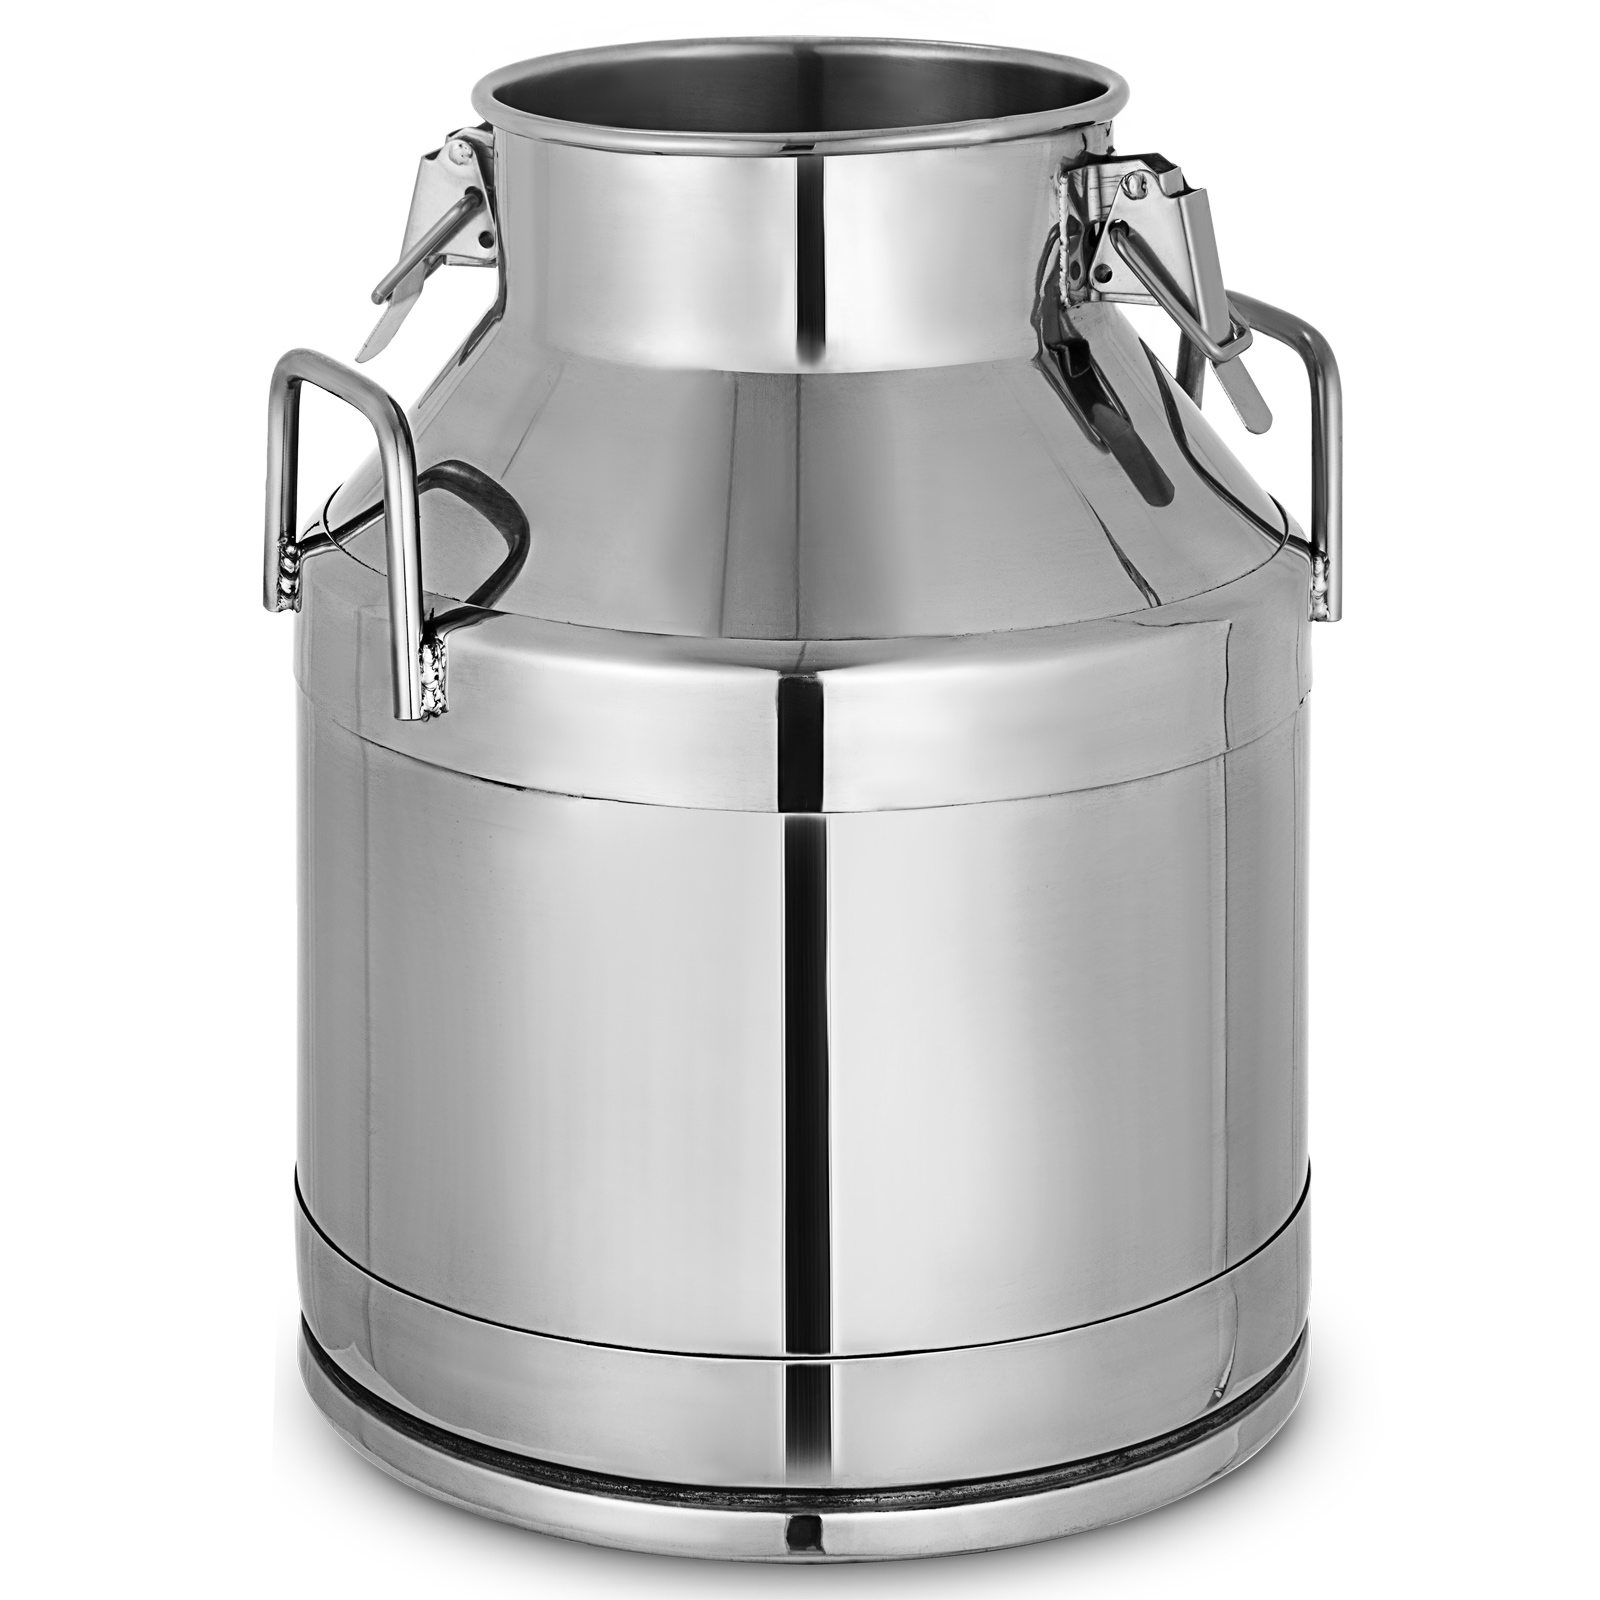 20L Milk Can Stainless Steel 304 W/Lid Tank Barrel Cow Dairy Goat Sheep 20 Gallon Stainless Steel Milk Can